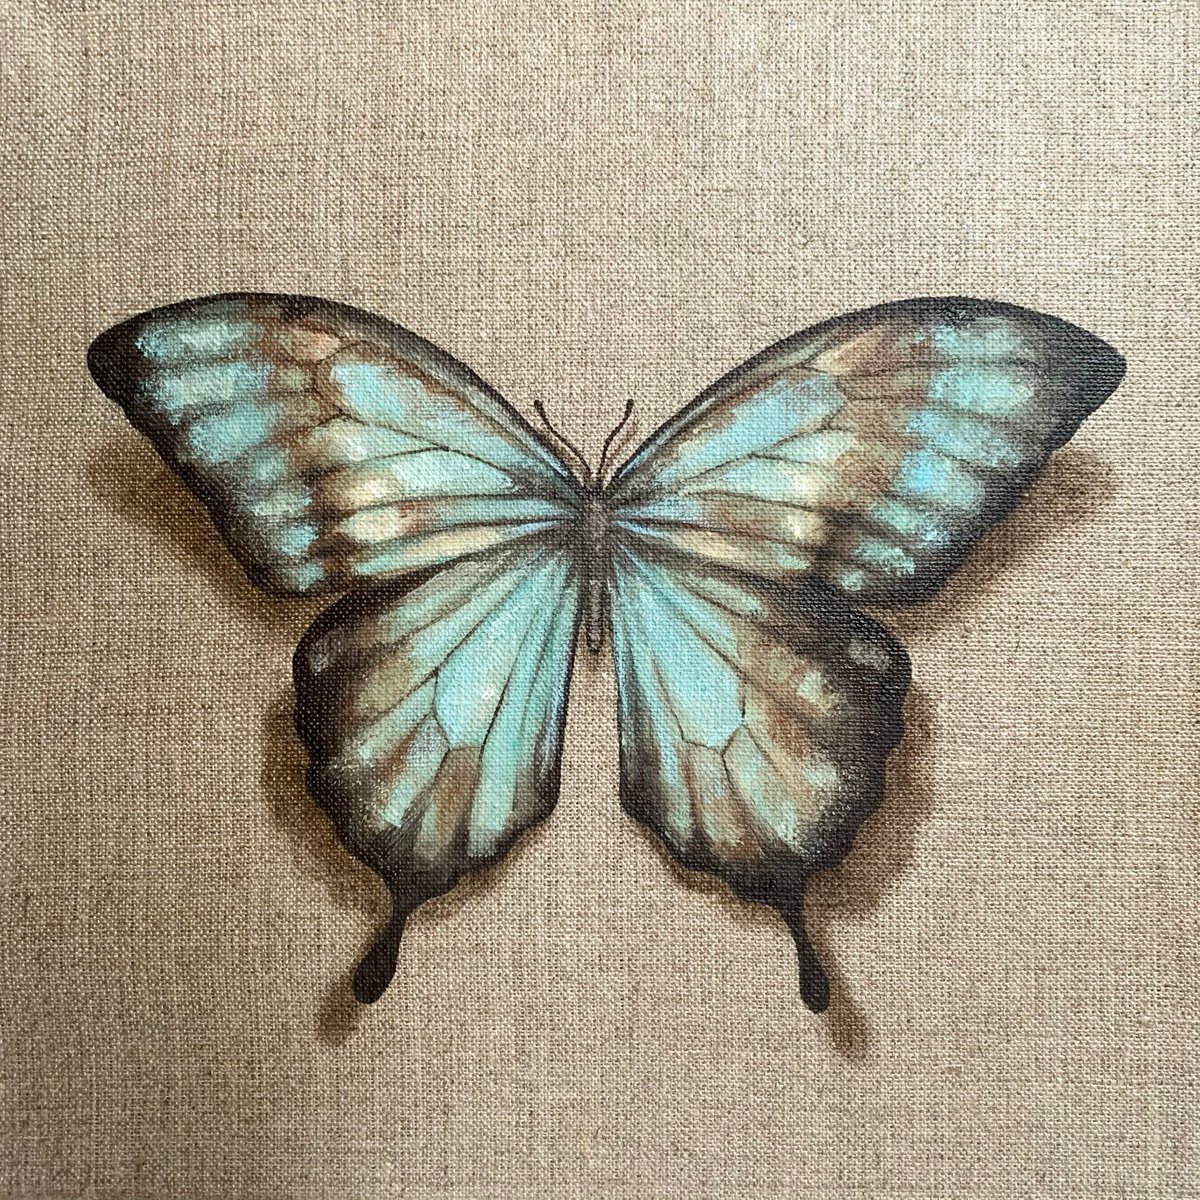  - Impermanent life - � #17 Turquoise butterfly by Alina Marsovna